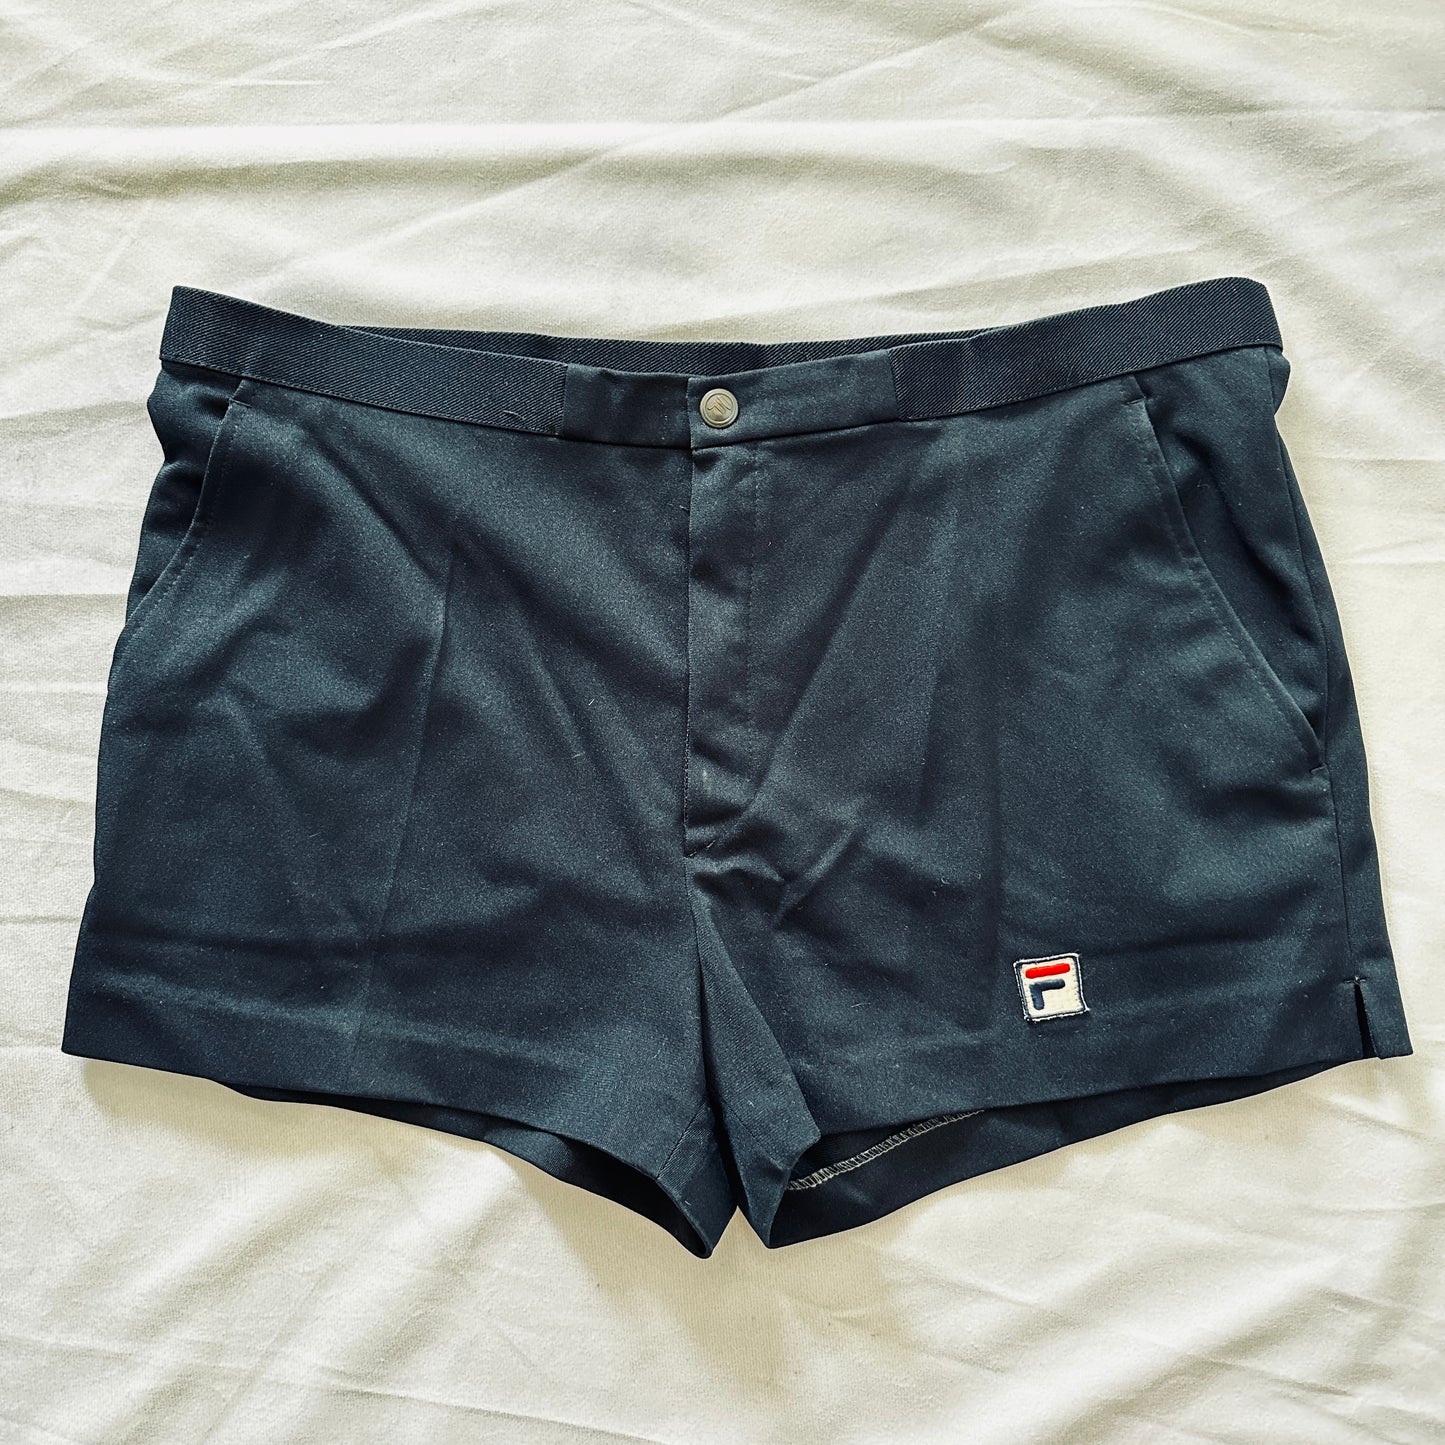 Fila Vintage 80s Tennis Shorts - Navy - 50 / L - Made in Italy